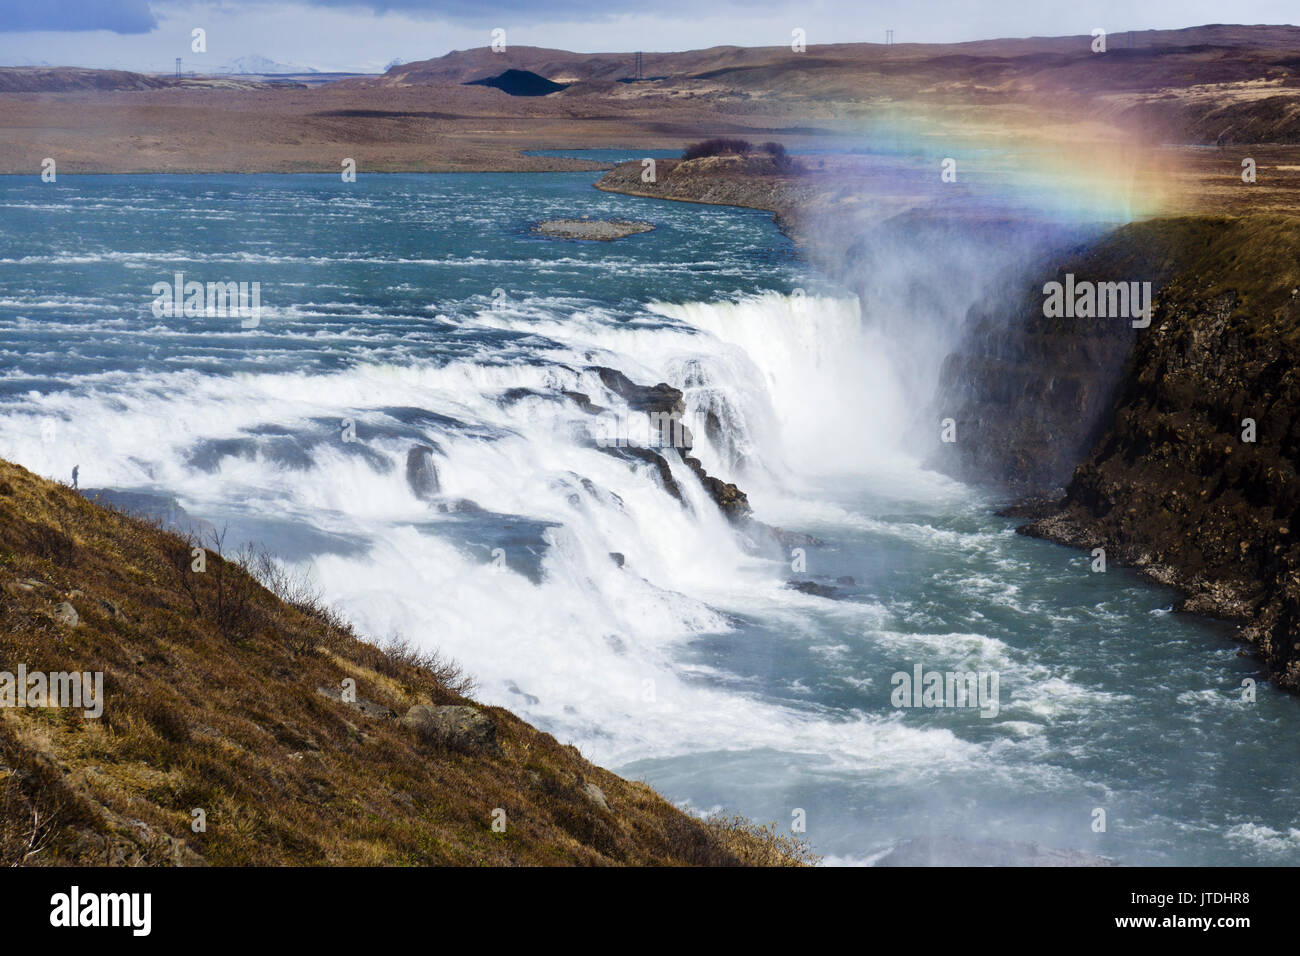 Gullfoss ('Golden Falls') is a waterfall located in the canyon of the Hvítá river in southwest Iceland. Stock Photo